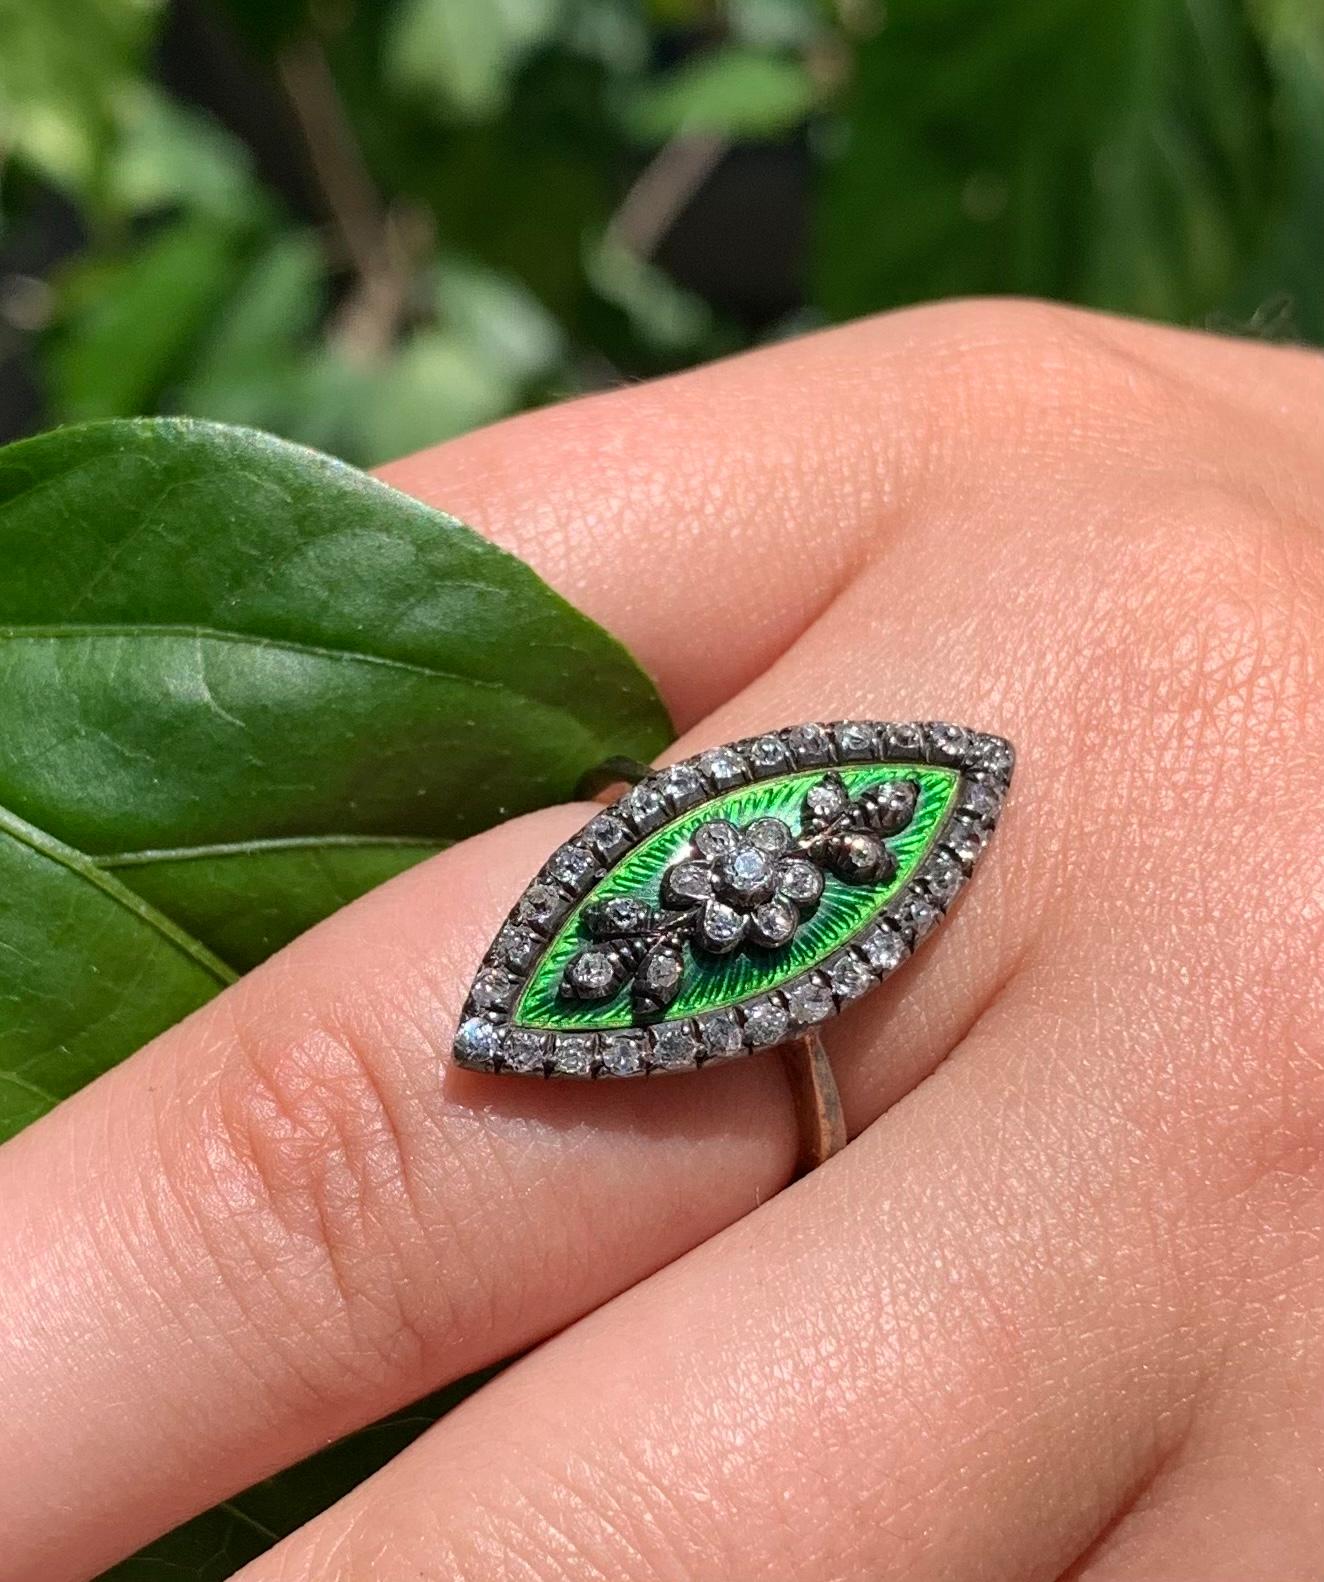 Elegant marquise shaped Georgian Period diamond, emerald green guilloche enamel 18K gold Forget-Me-Not ring.
Circa 1820
The center design of a forget-me-not flower flanked by stylized diamond leaves on a vibrant guilloche enamel background, 28mm by